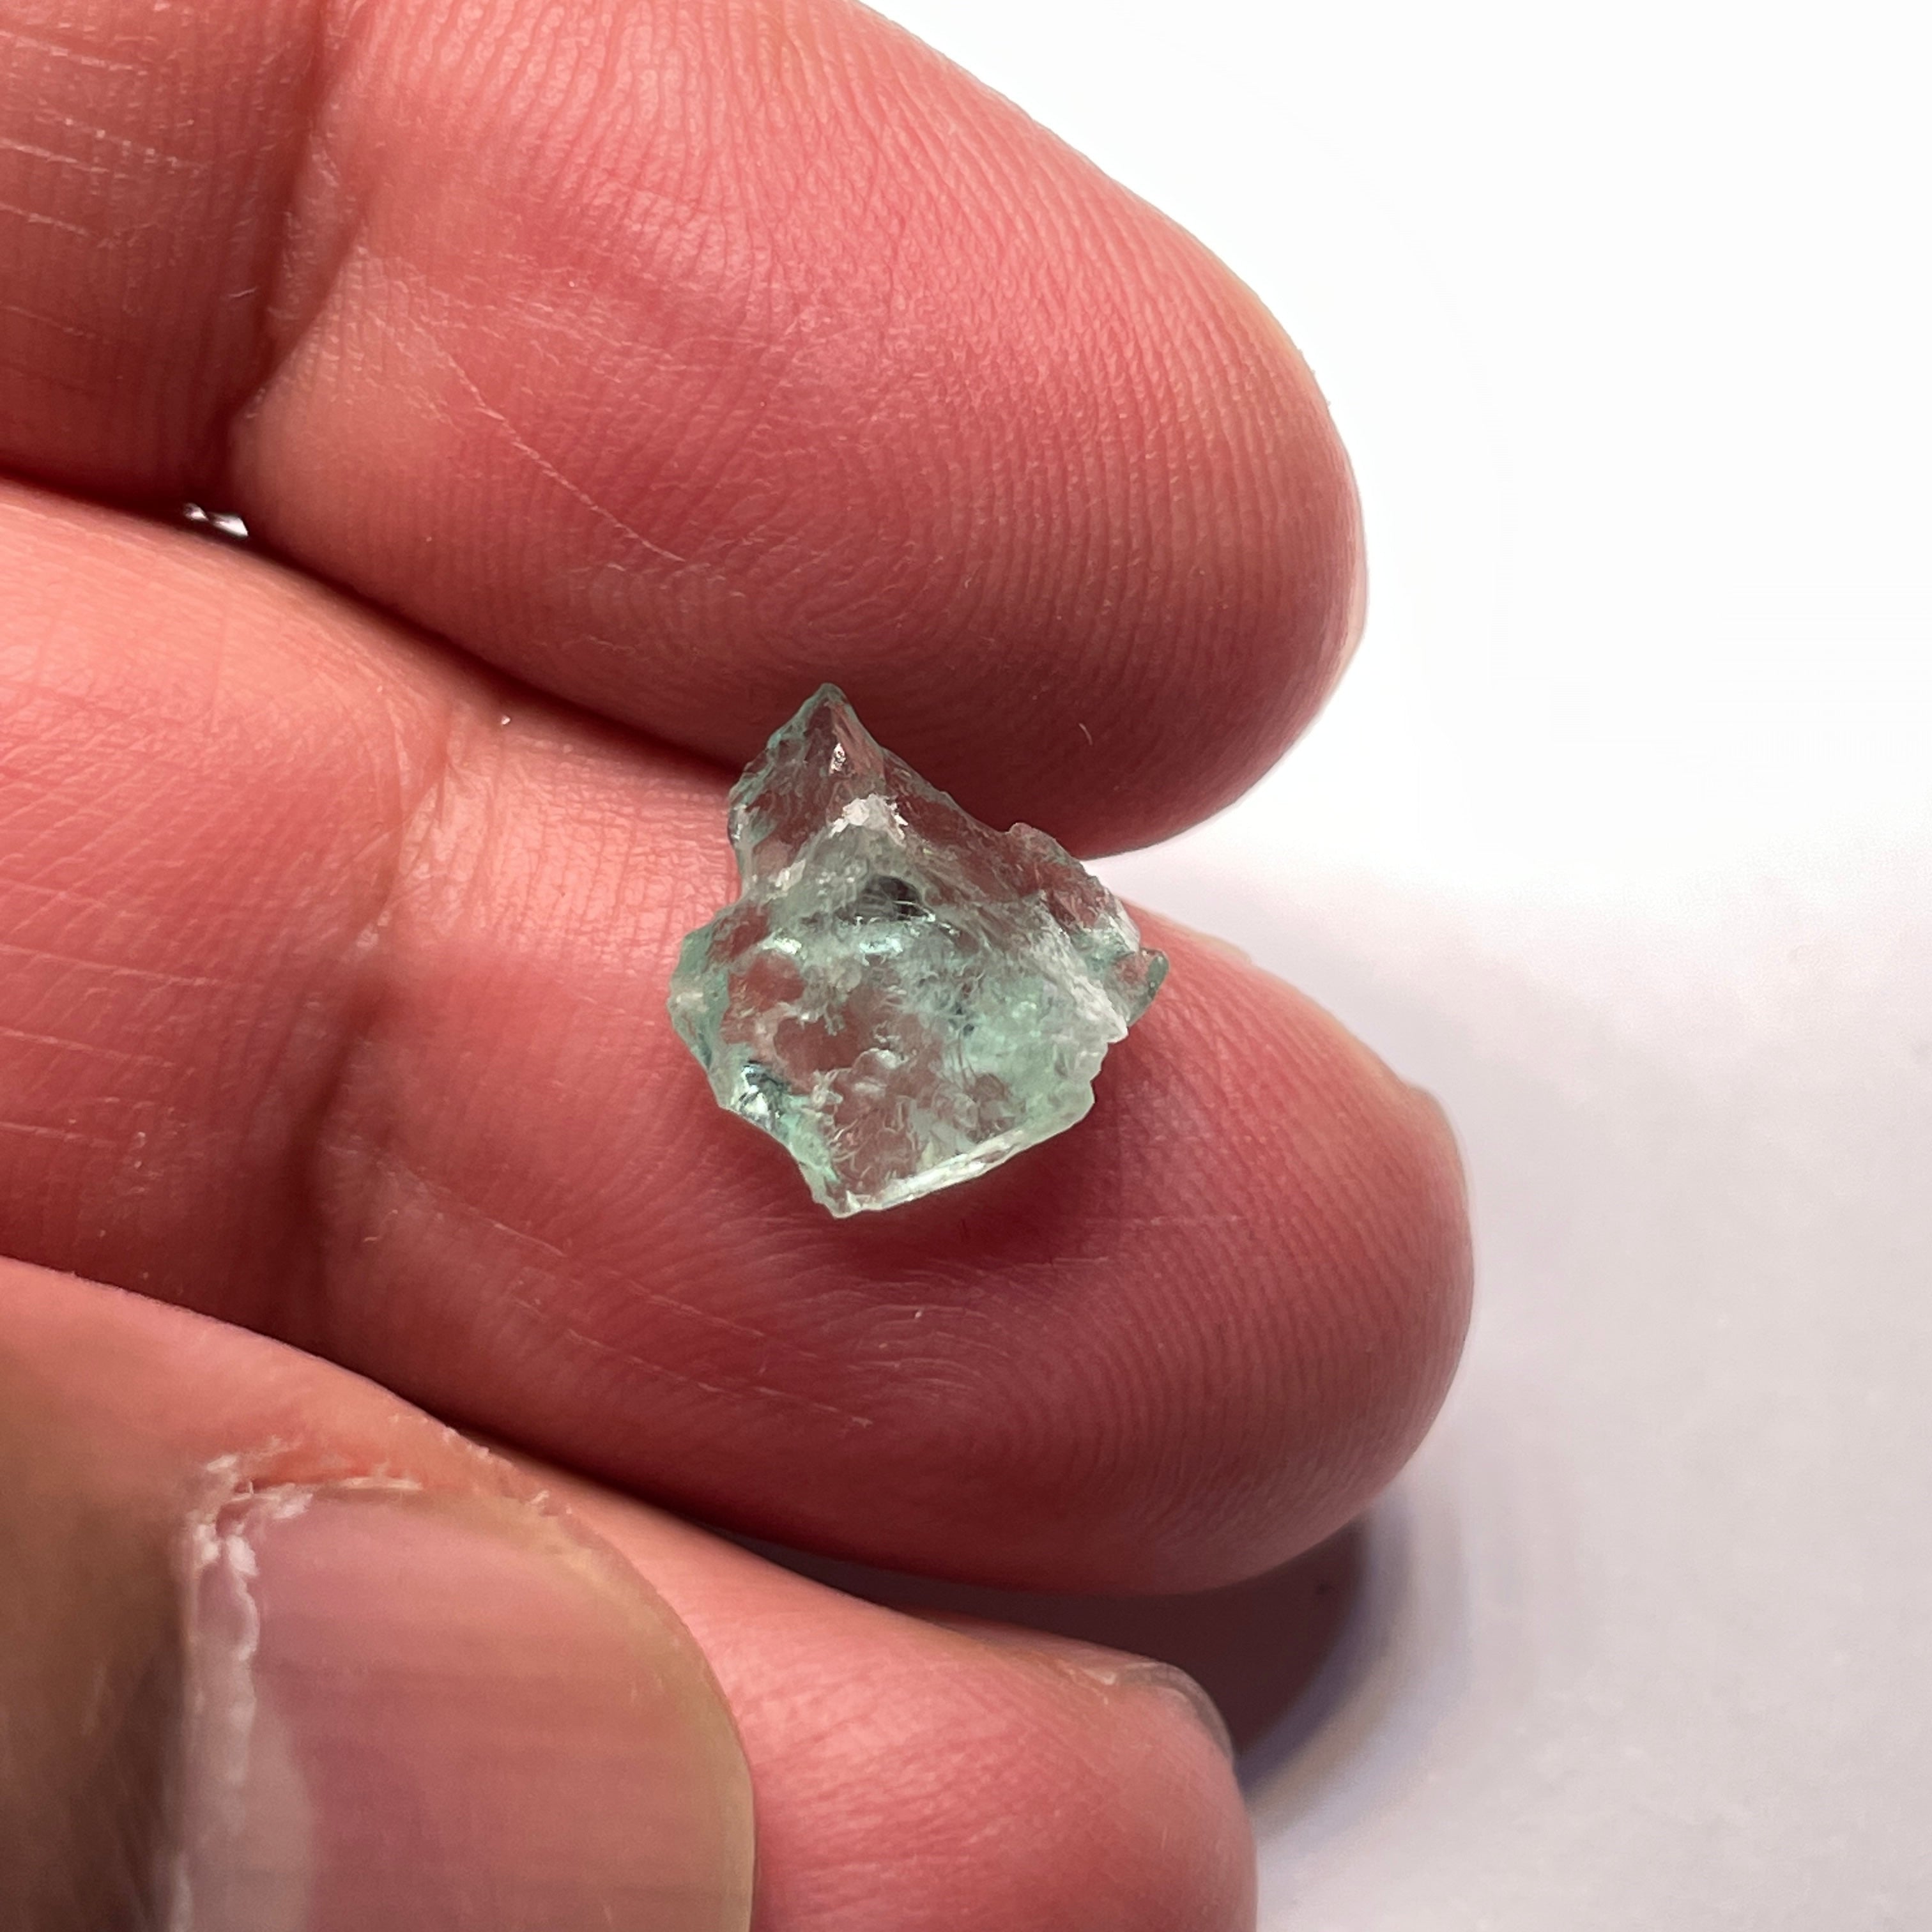 2.48Ct Emerald Tanzania Untreated Unheated No Oil Slight Inclusions Facet Or Cab With Set In